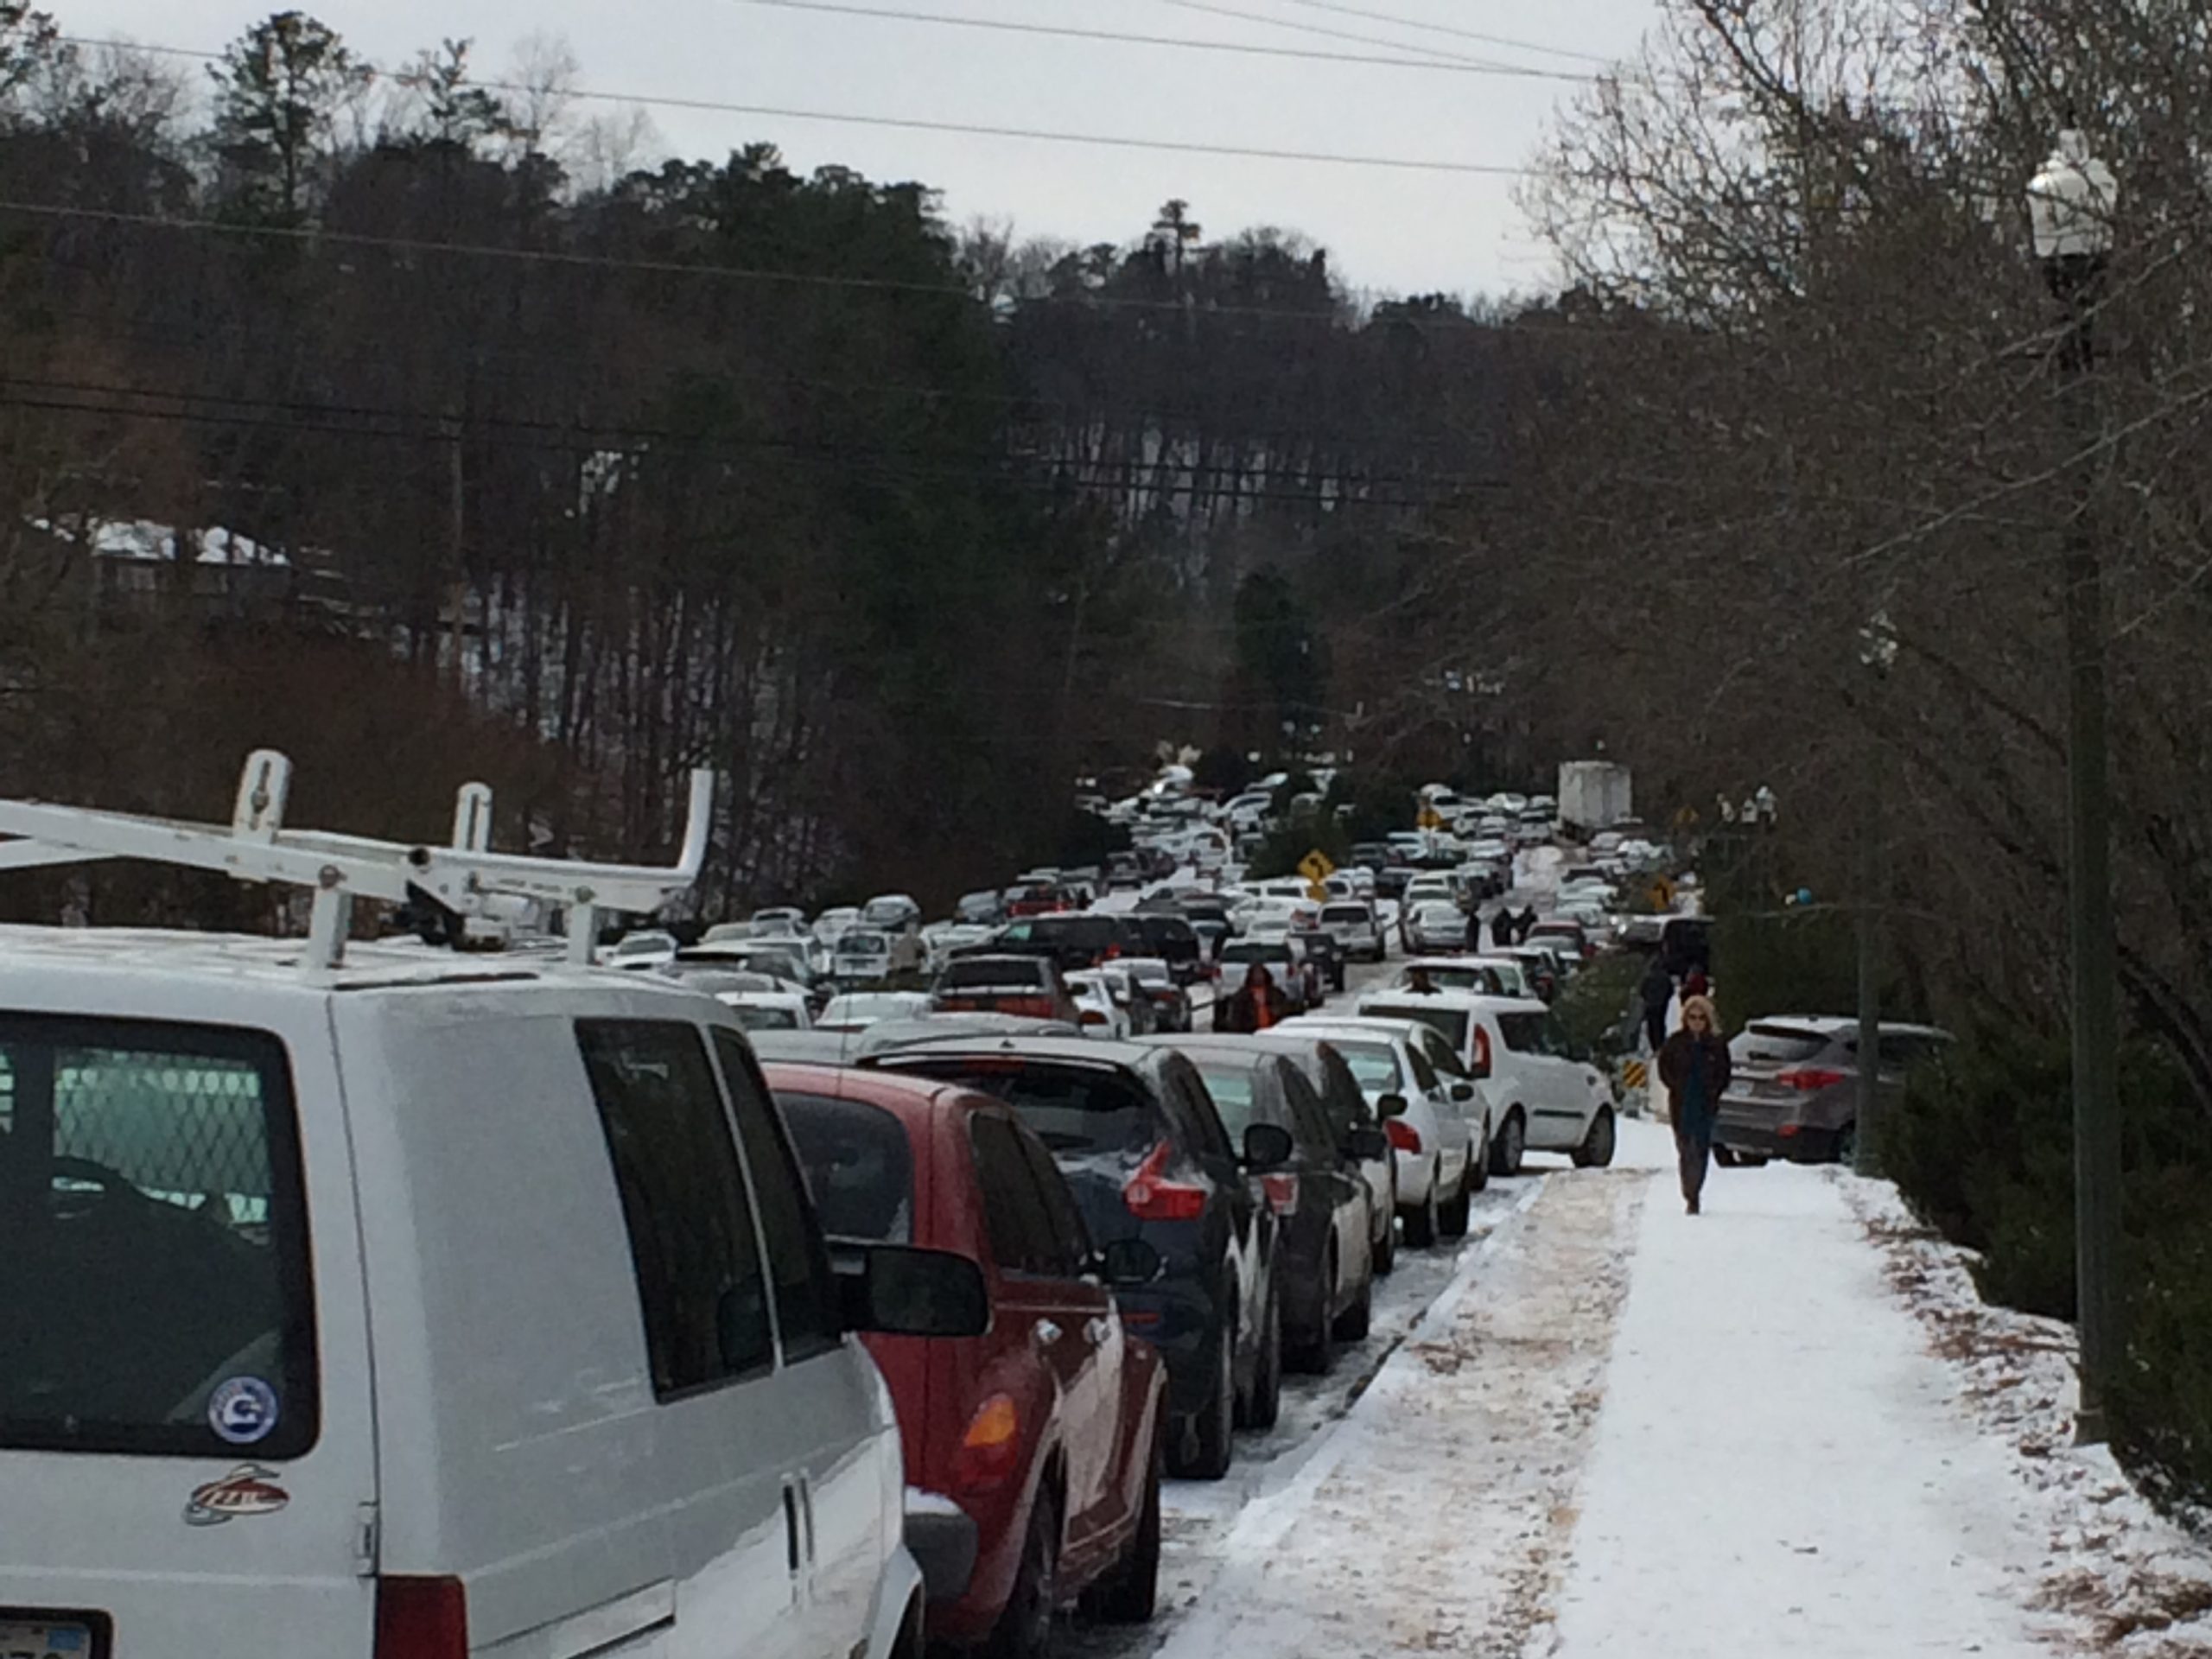 Multiple cars backed up on a snowy day